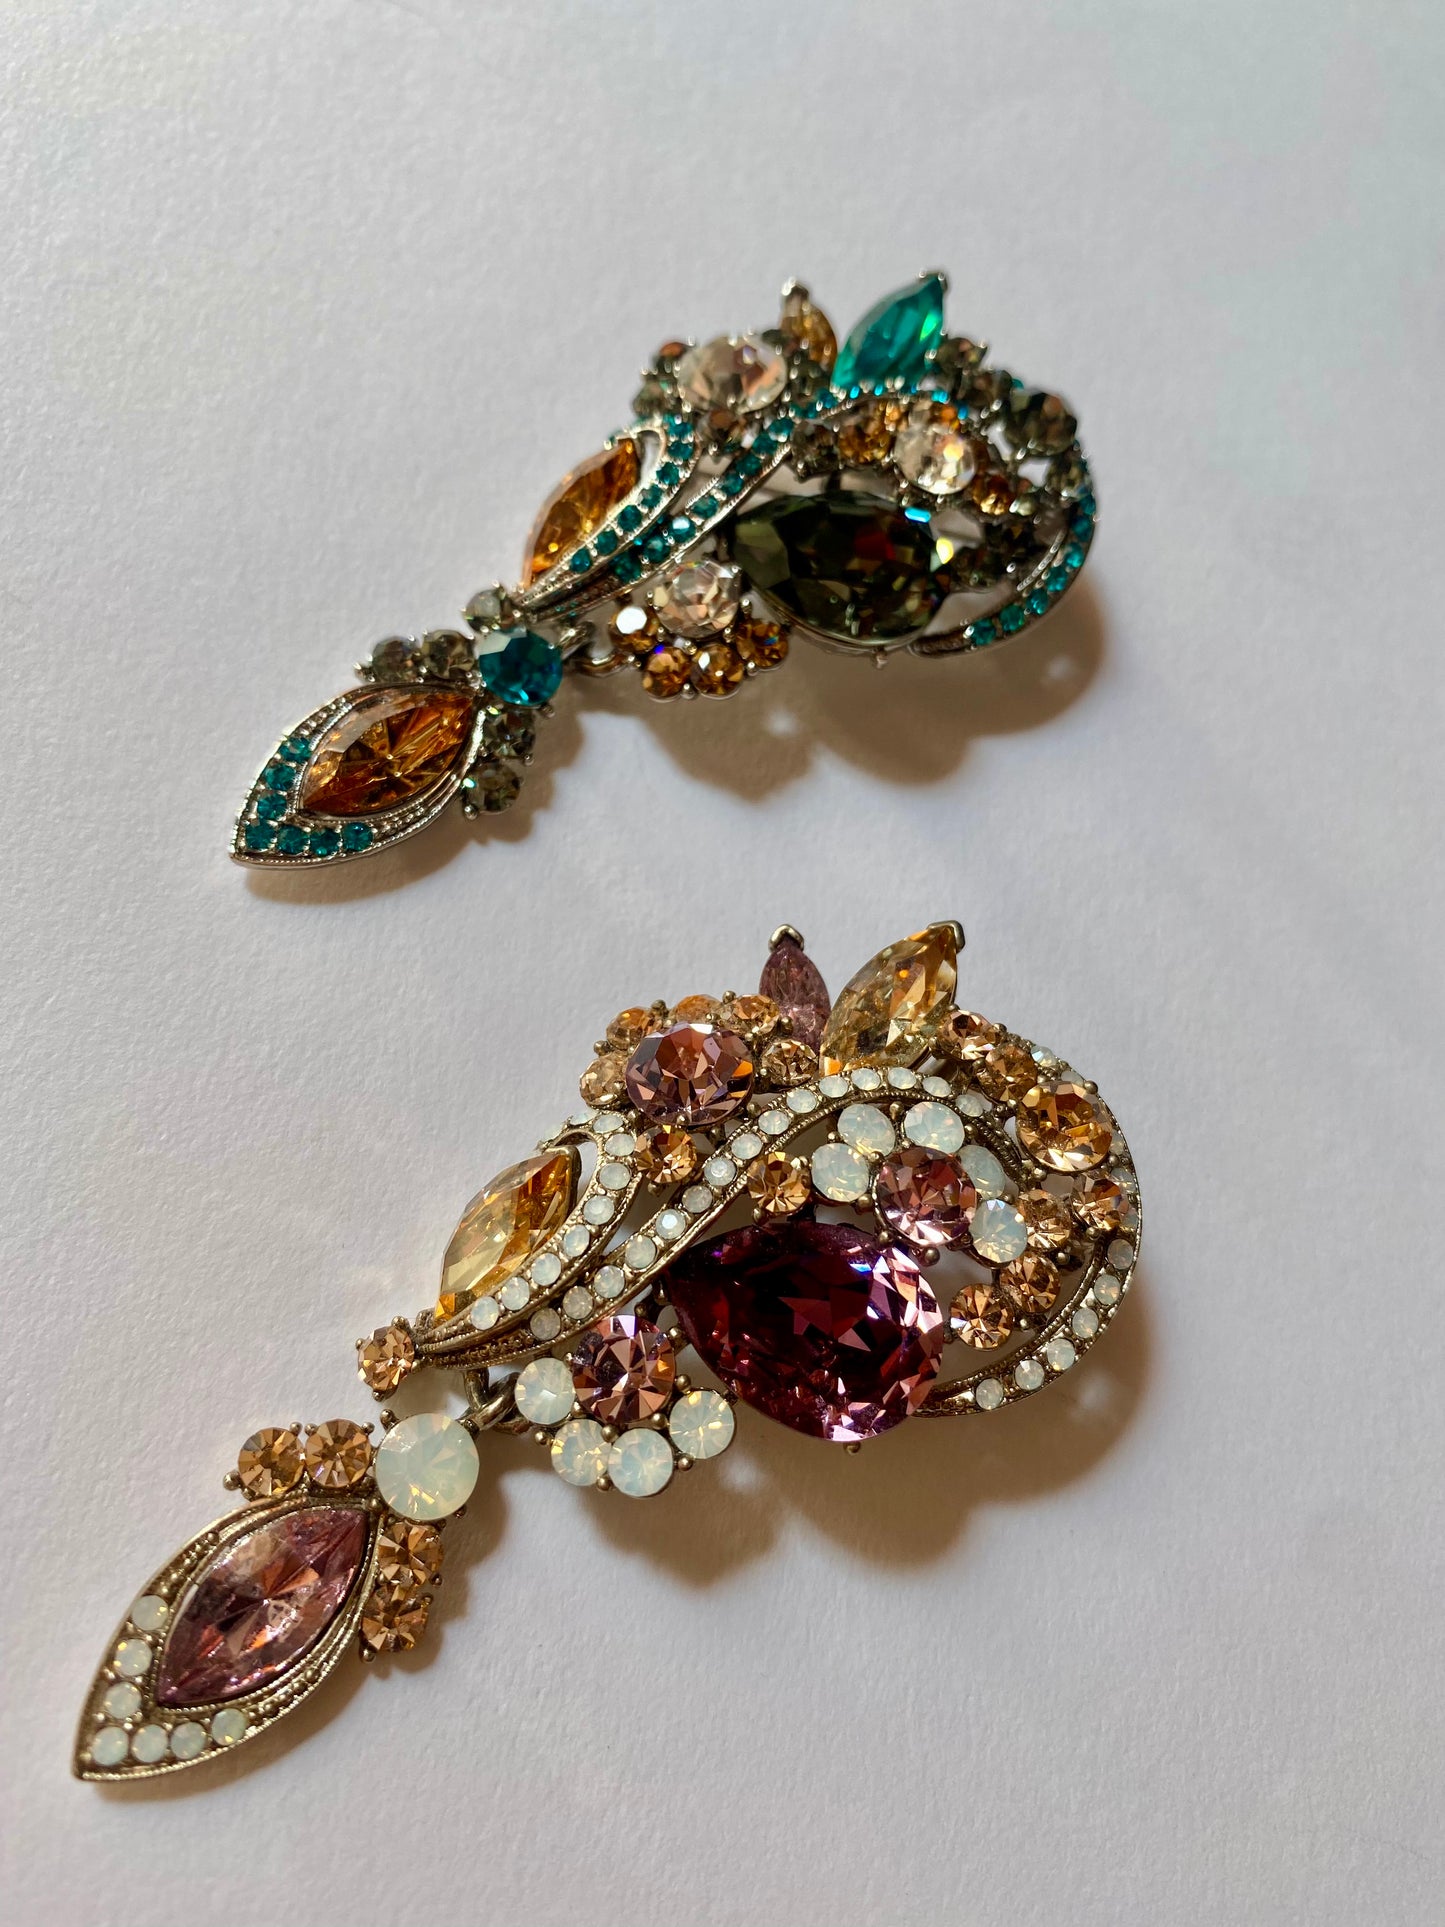 Brooch with dangling crystals